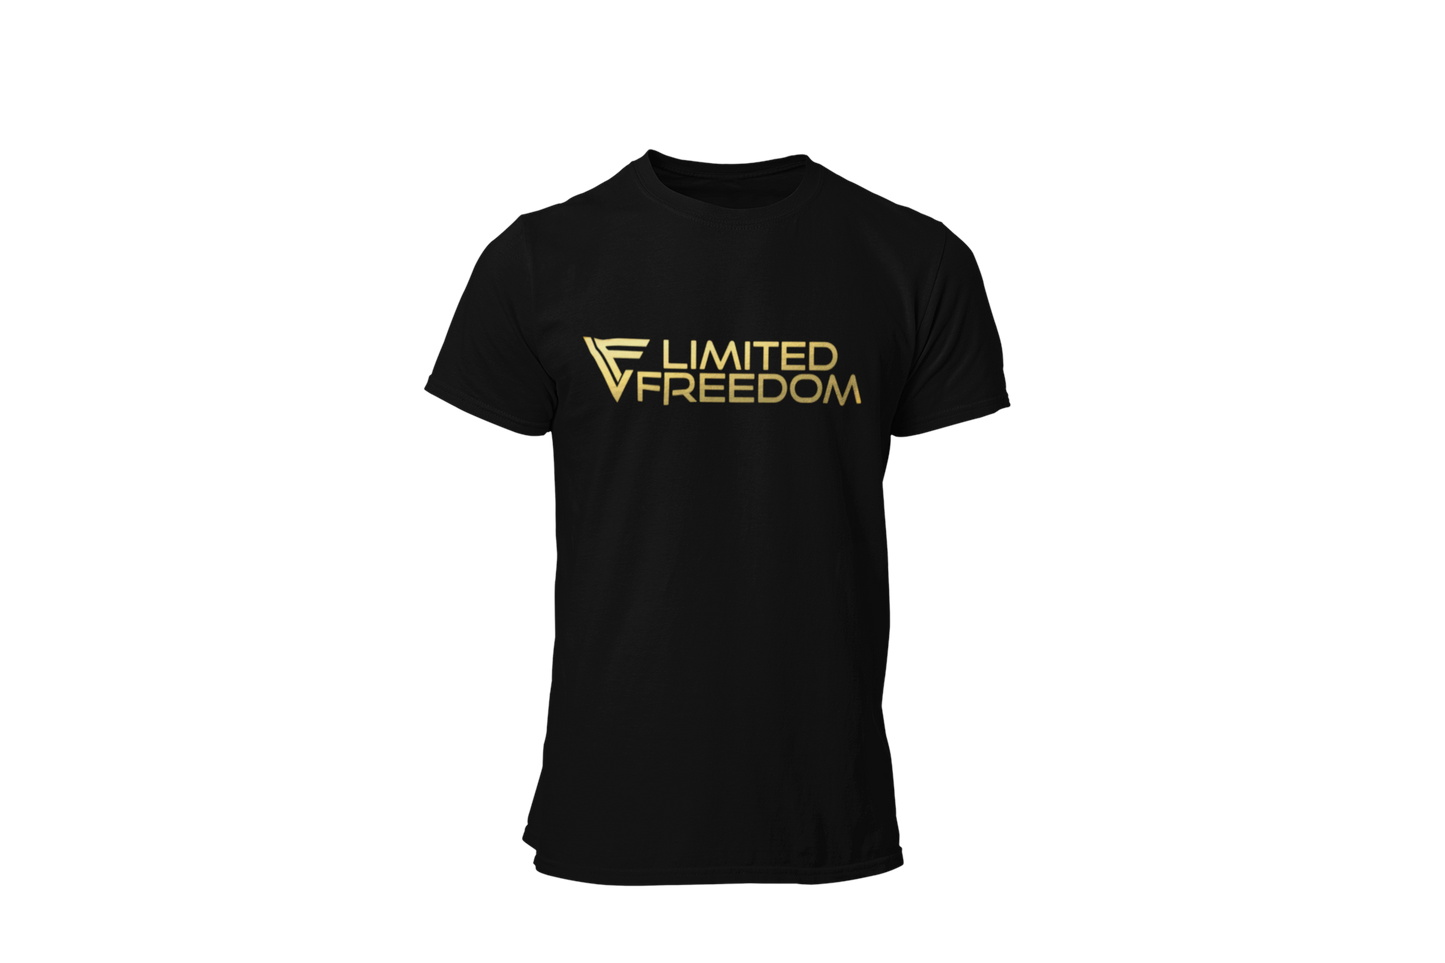 L.F Limited Freedom T-shirt Black with Gold